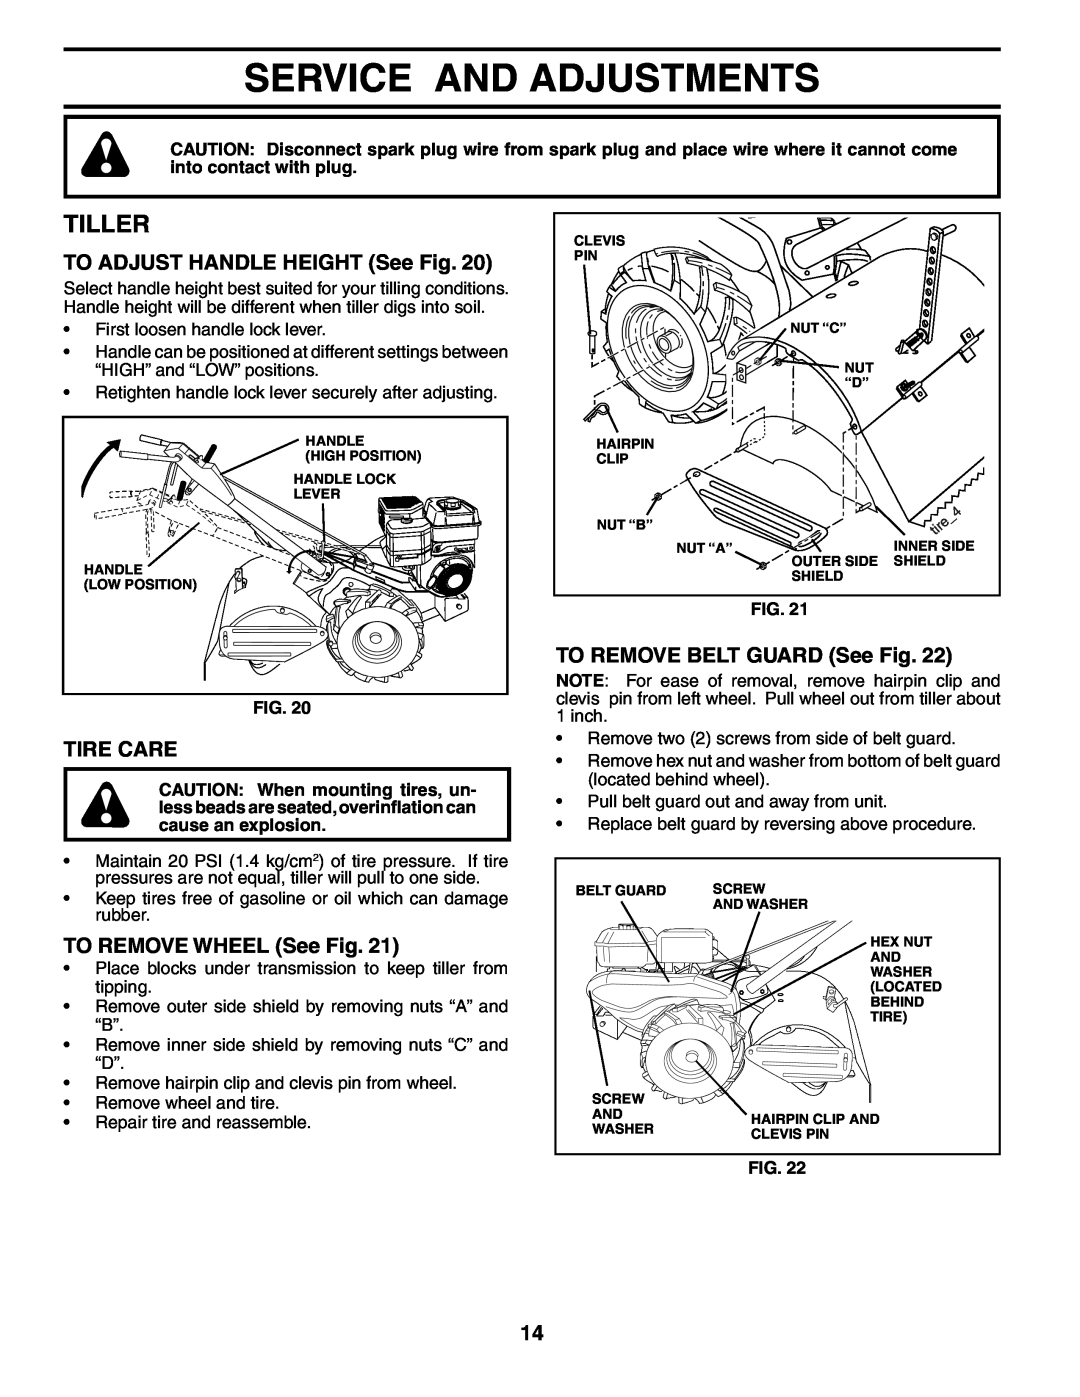 Husqvarna 650RTT Service And Adjustments, Tiller, TO ADJUST HANDLE HEIGHT See Fig, Tire Care, TO REMOVE WHEEL See Fig 